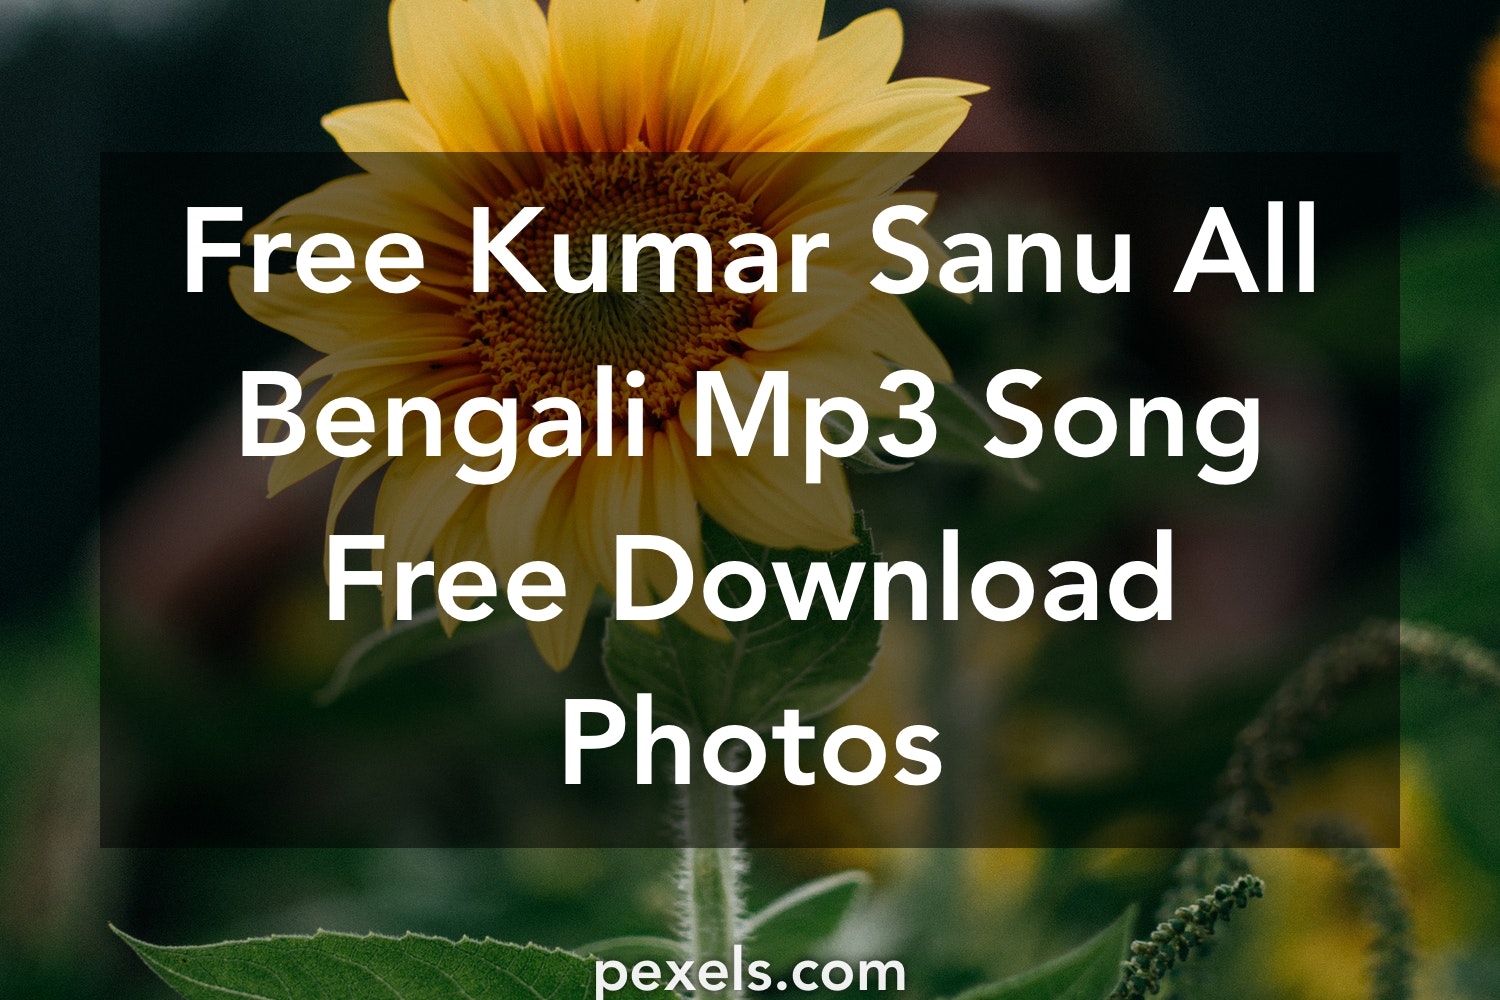 Bengali Mp3 Song Free Dnld